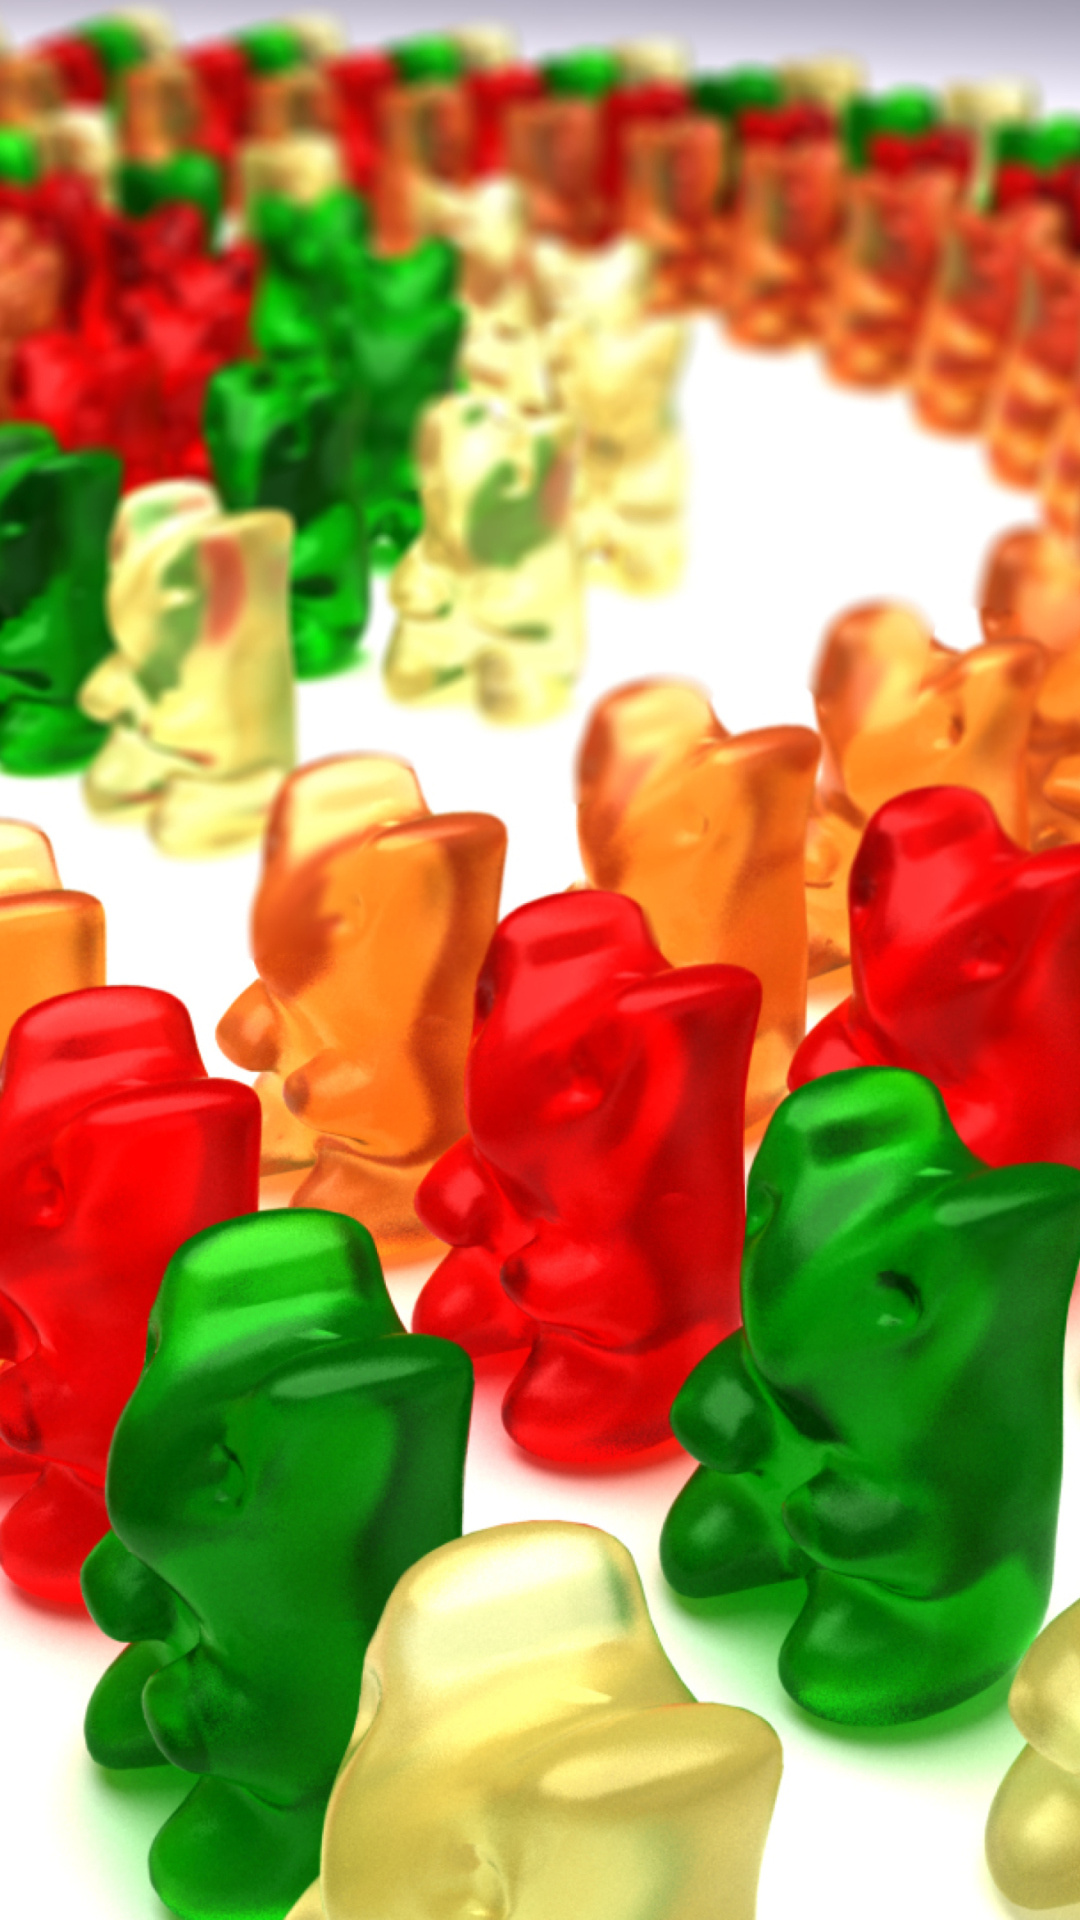 Gummy Bears, Lumia 2520 wallpaper, Chewy treat, Nokia tablet background, 1080x1920 Full HD Phone